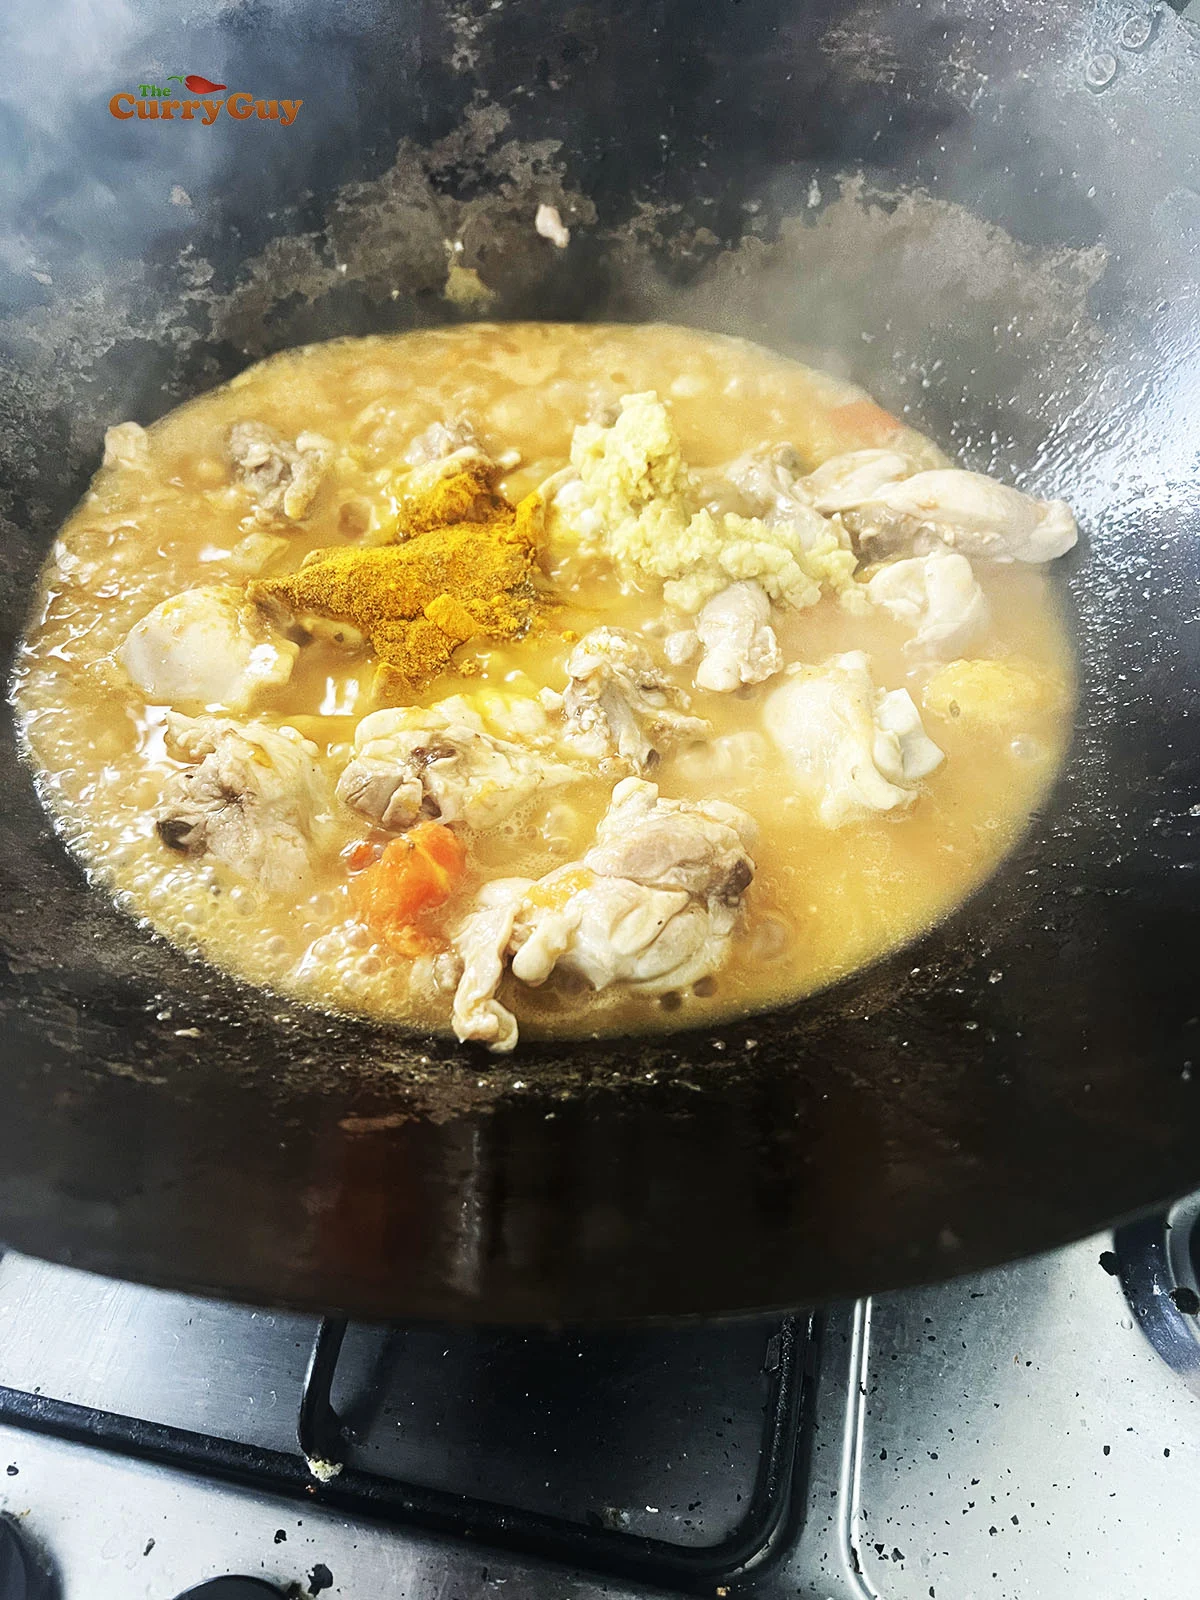 Adding garlic and ginger paste, spices and water to the chicken karahi